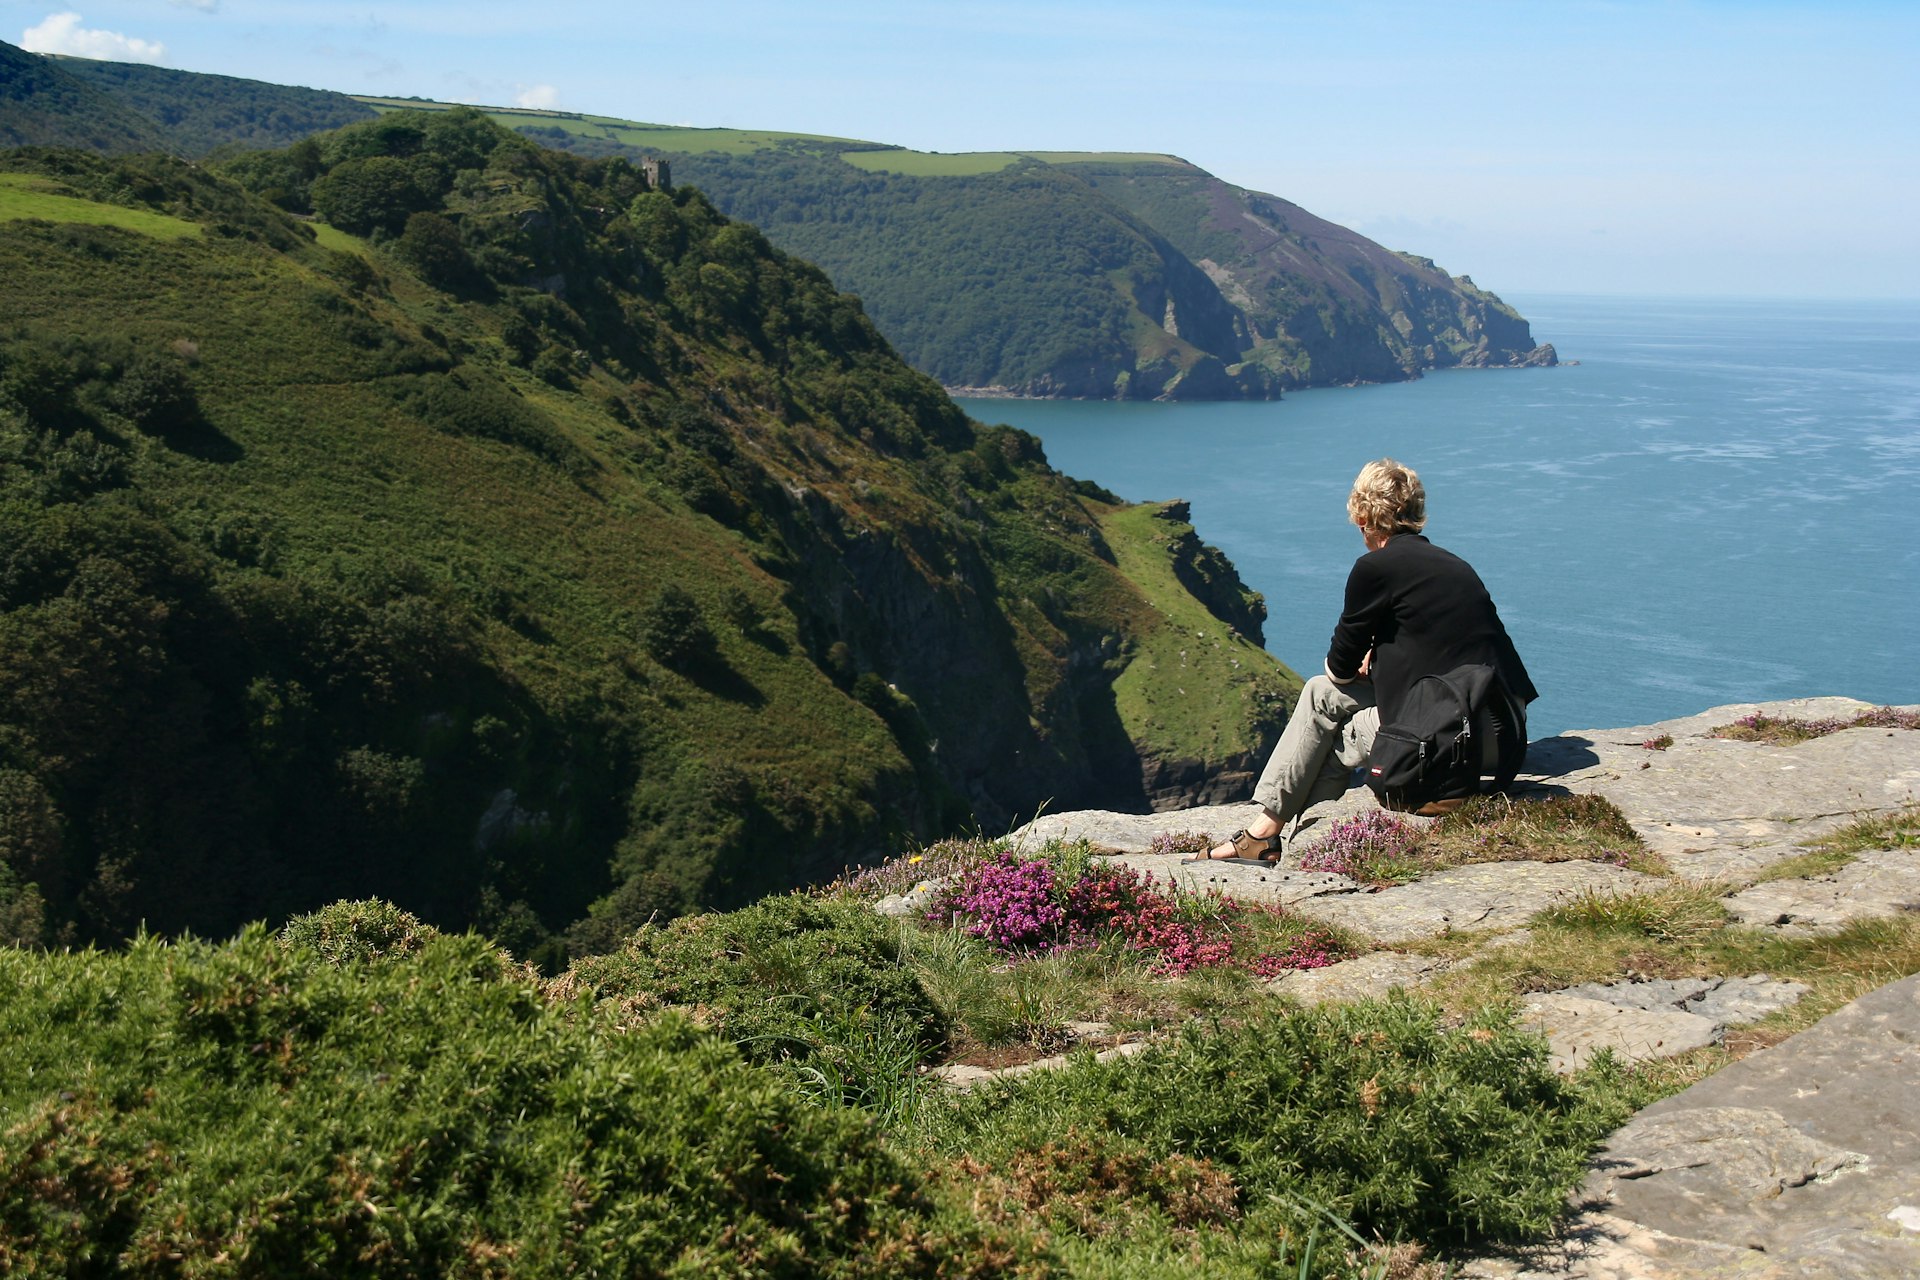 A solo figure sits on a clifftop looking along a coastline that stretches off into the distance